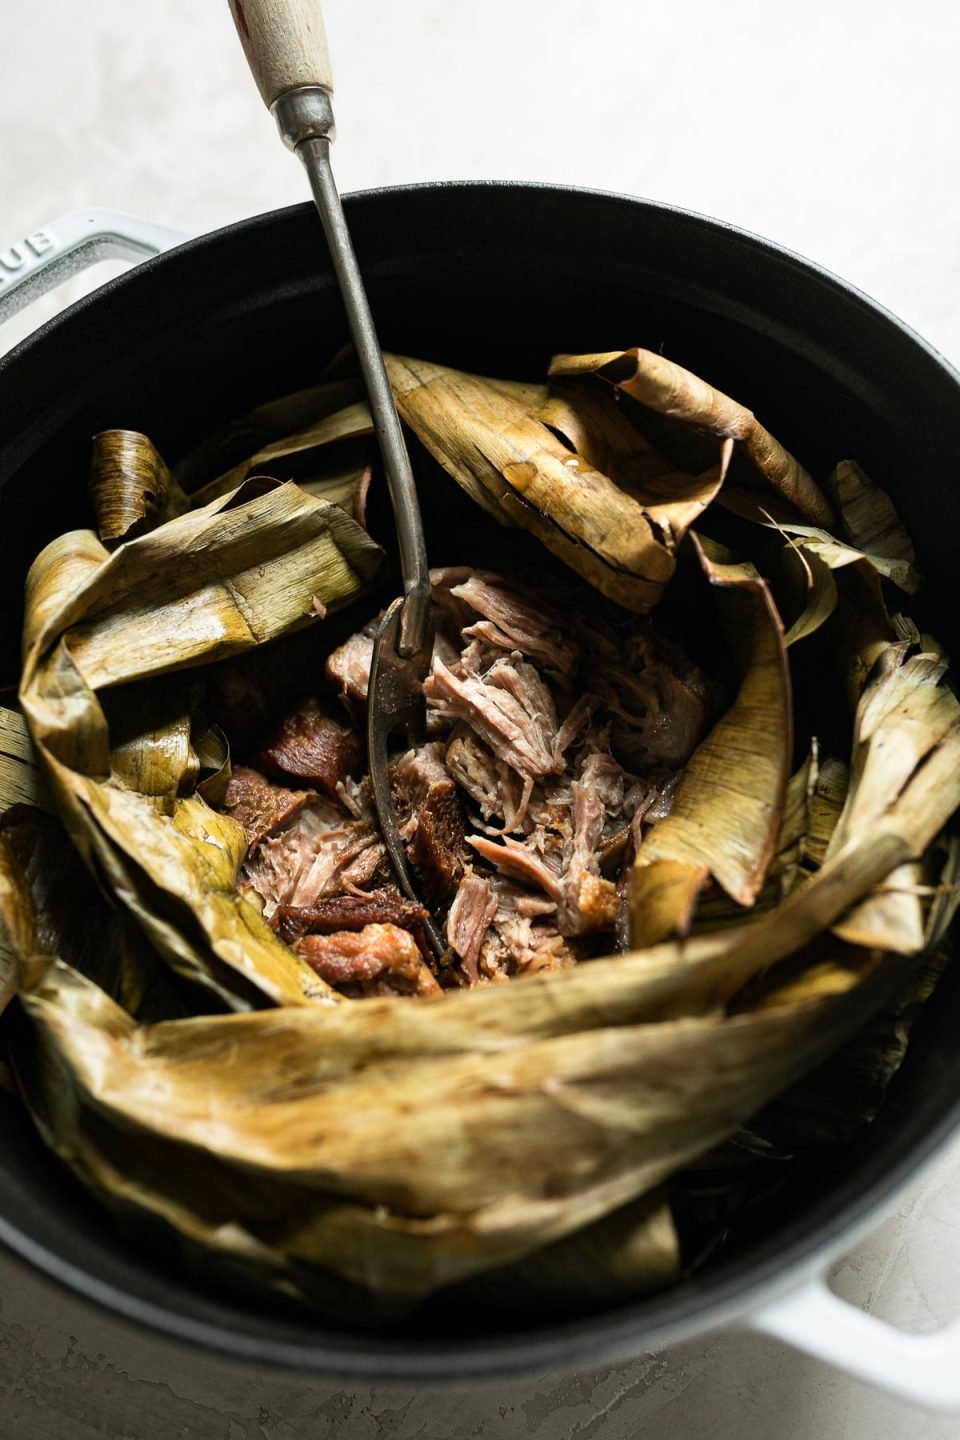 Side angle of shredded Kalua pig shown inside dried banana leaf in a white Dutch oven atop a creamy cement surface. A serving fork with a long wooden handle is inserted in the center of the pork.